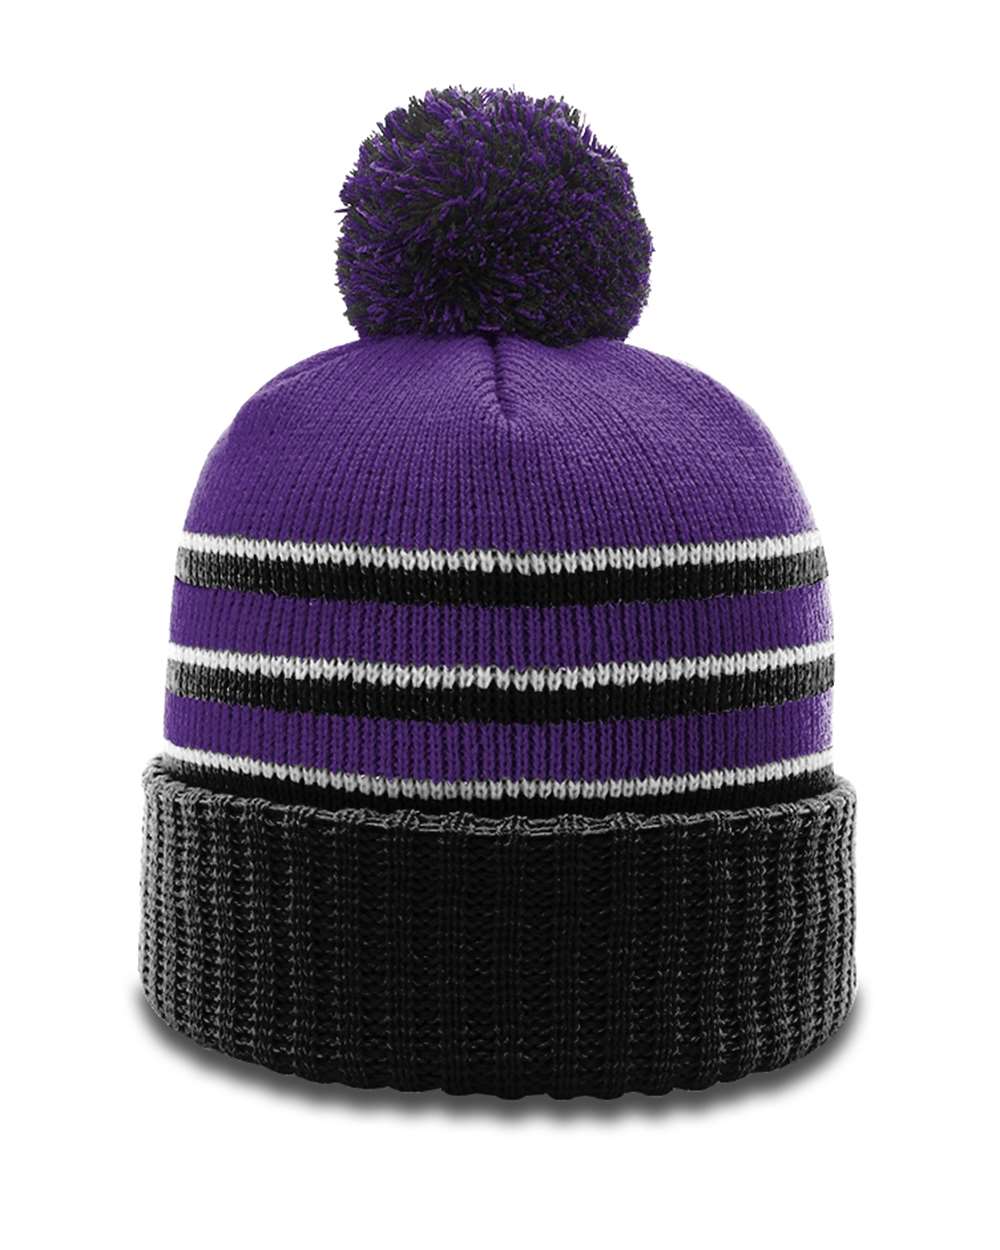 Black and Multi-Purple stripped Essential Knit Beanie